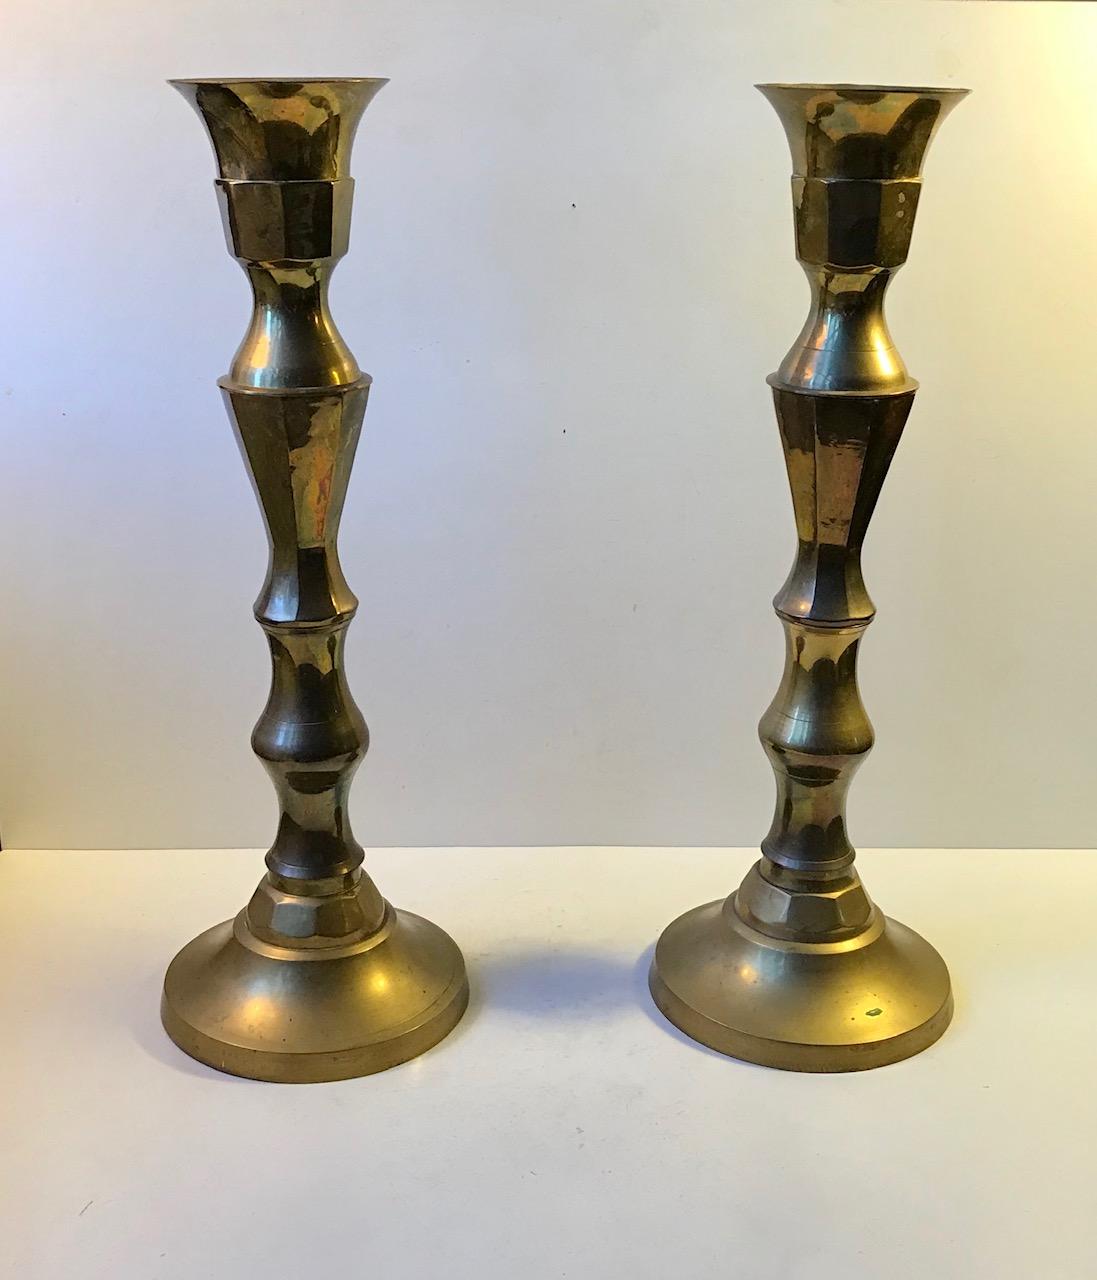 Monumental Danish Church Candleholders in Brass, 1950s In Good Condition For Sale In Esbjerg, DK